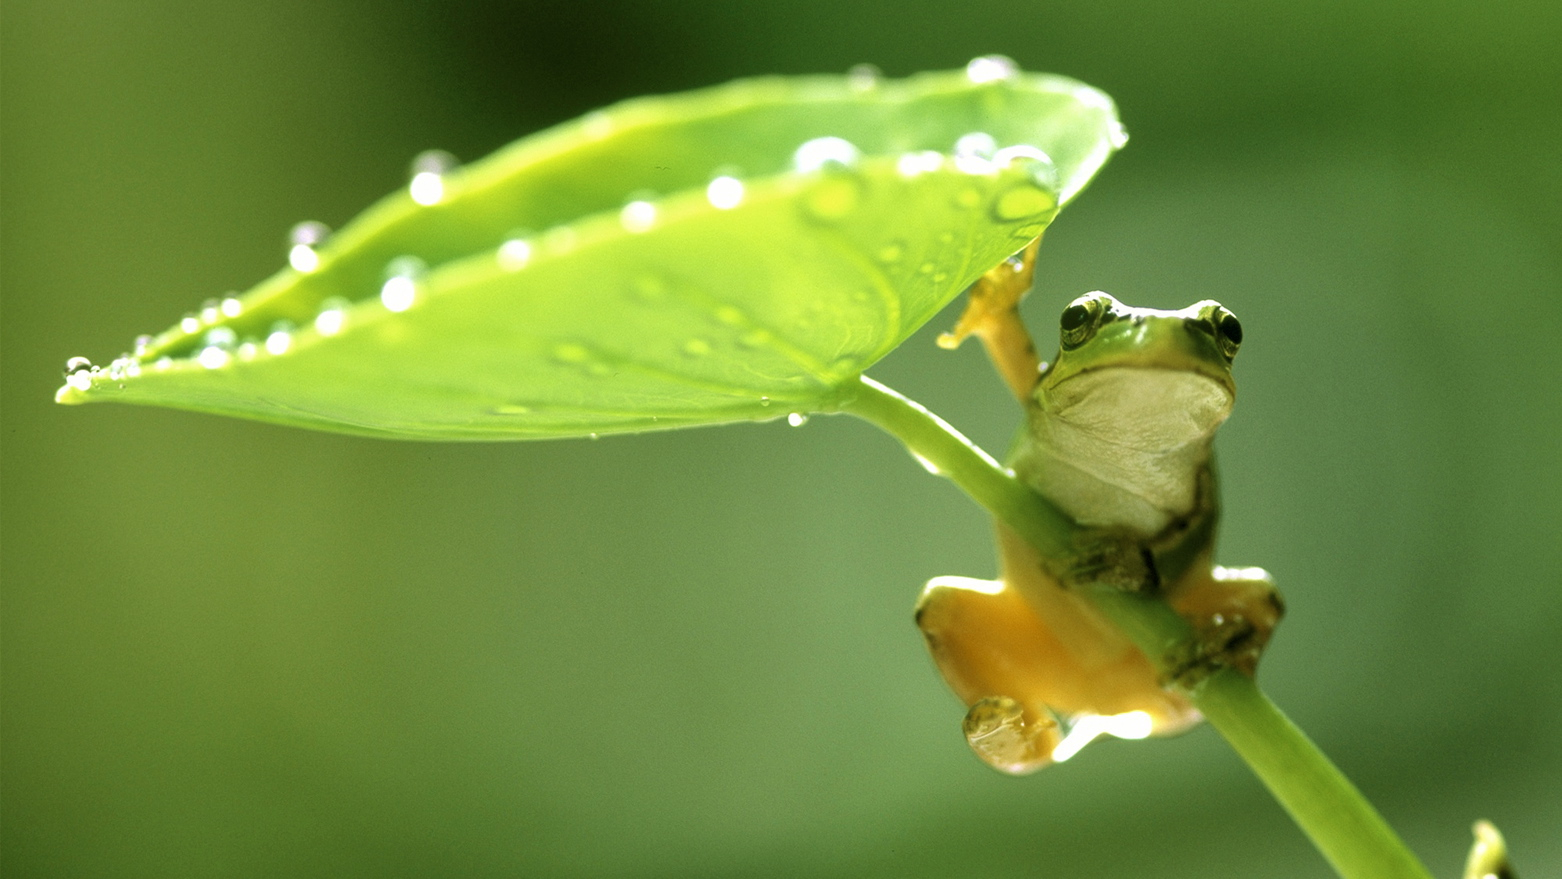  Leap Frog Toys Malaysian Leaf Wallpaper 1562x879 Full HD Wallpapers